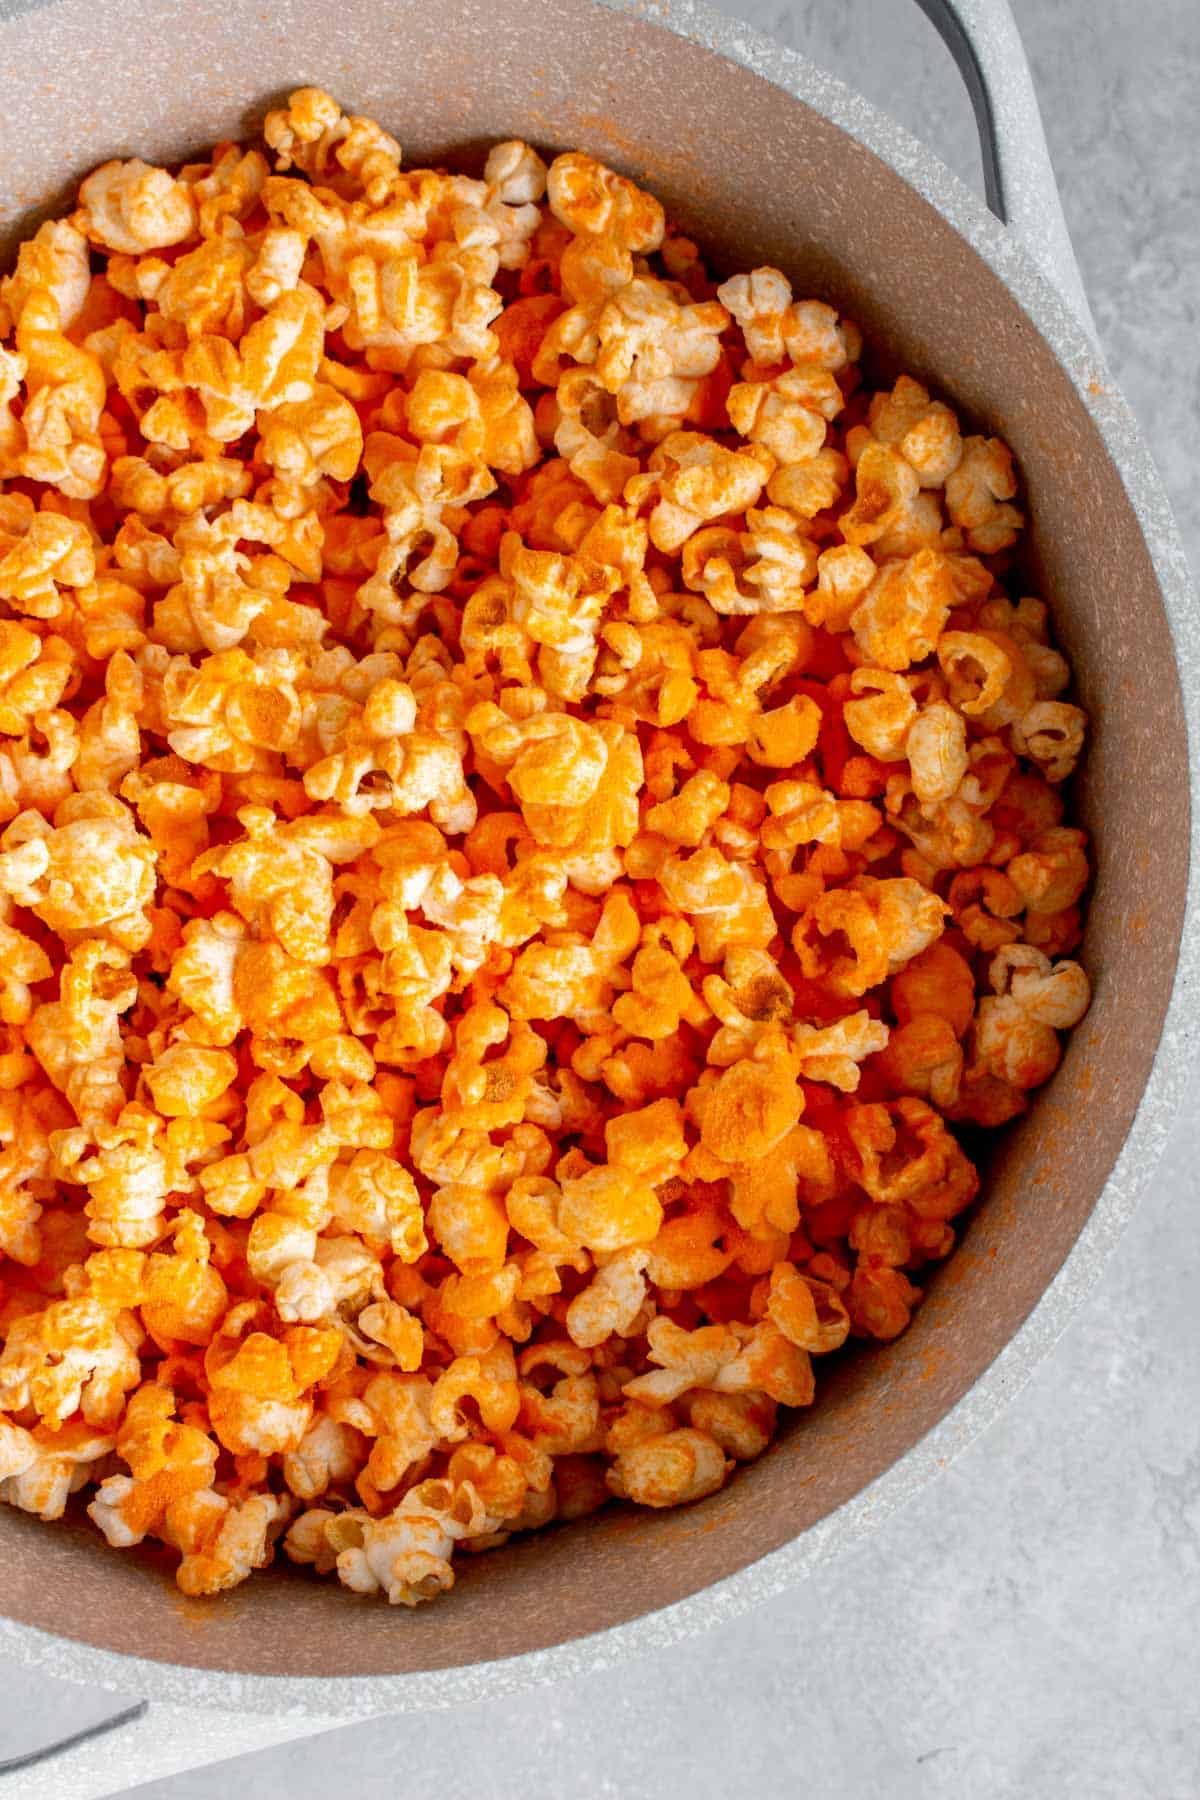 Overhead view of a pot of cheddar popcorn.